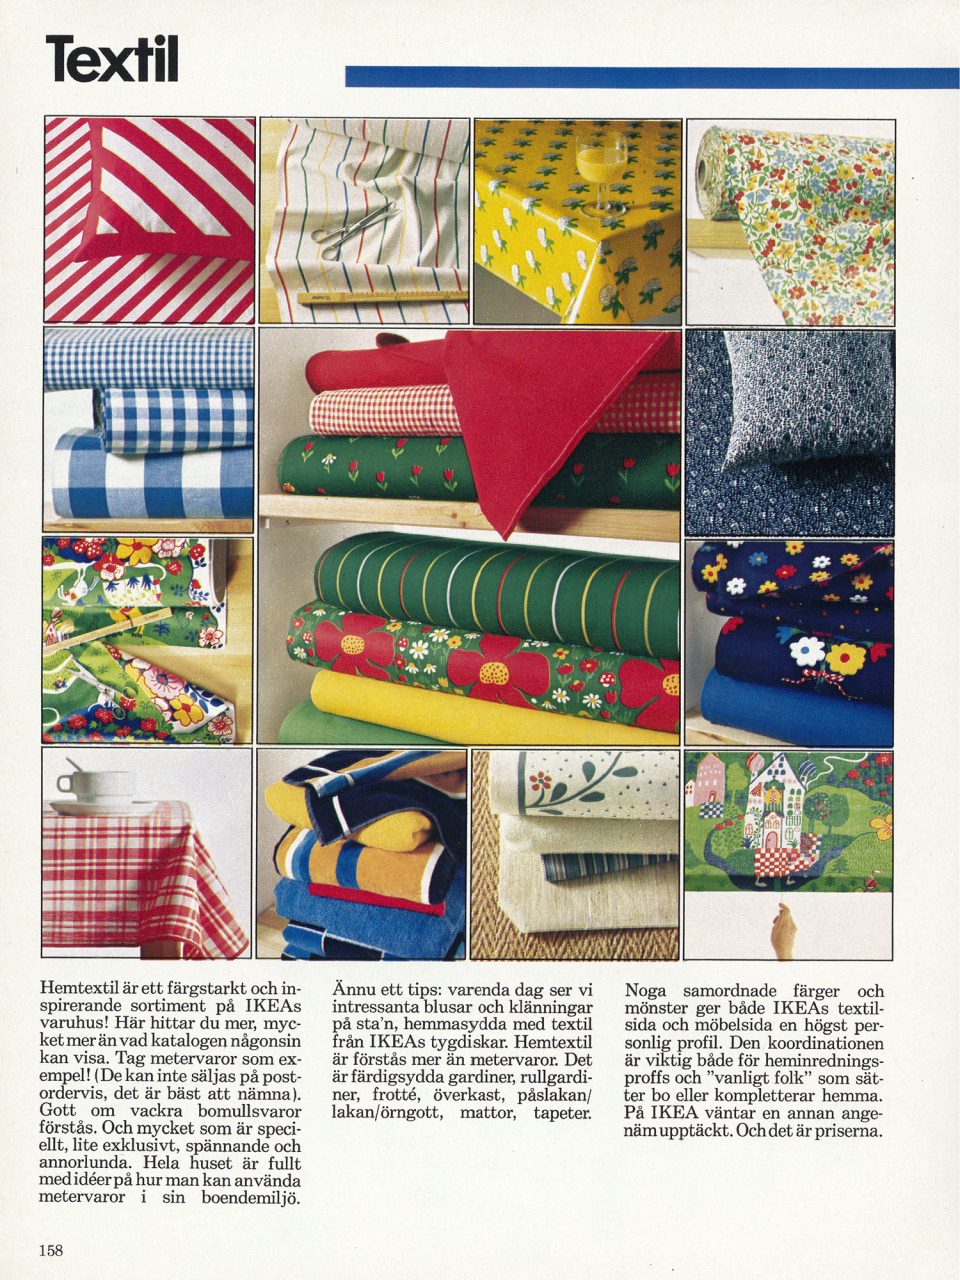 1977 IKEA catalogue textile page, showcasing brightly coloured graphic and flowery patterned fabrics.